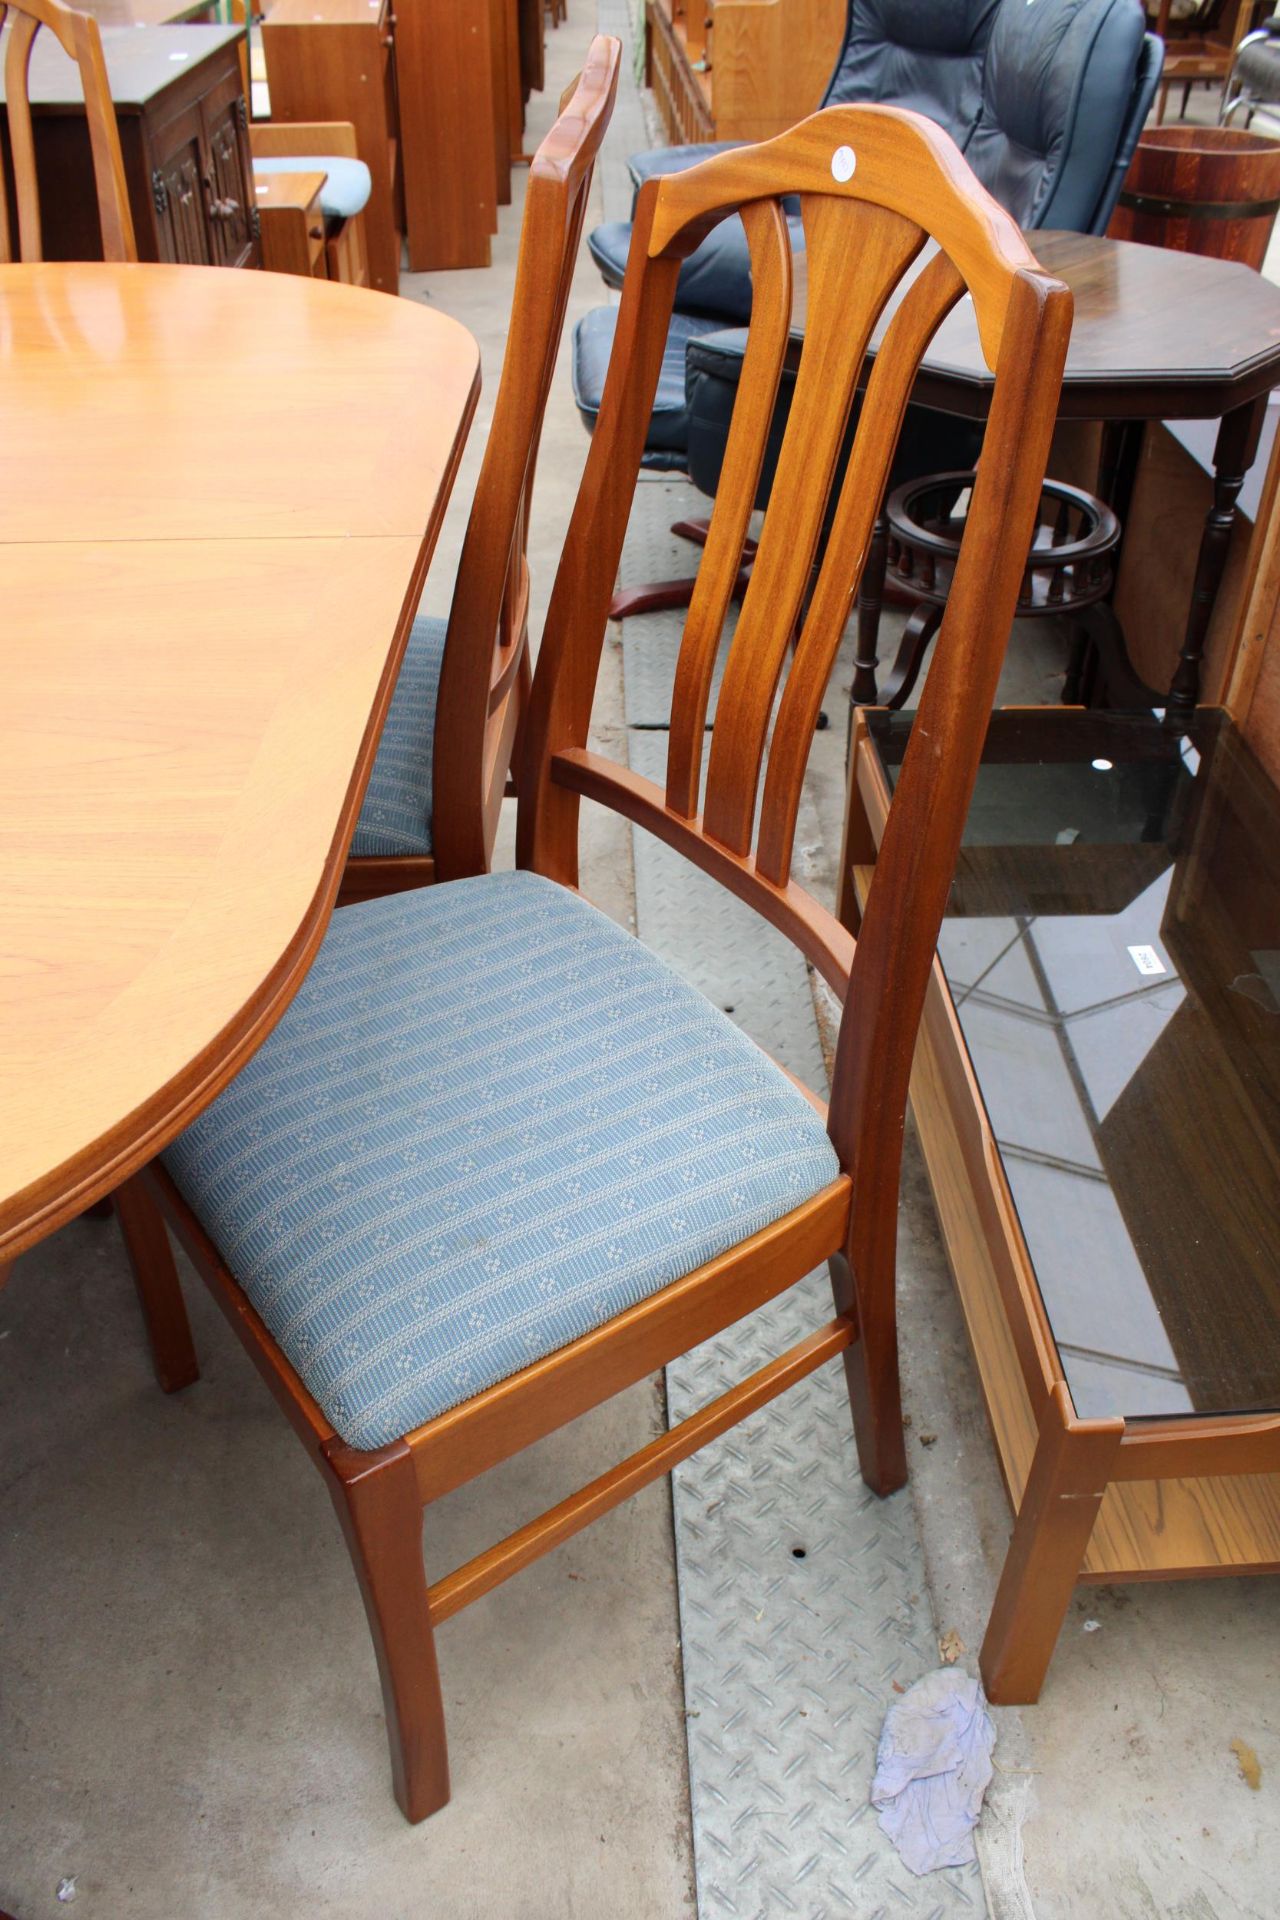 A NATHAN RETRO TEAK EXTENDING DINING TABLE 64" X 41" (LEAF 18") ON WHALE FIN LEGS AND SIX DINING - Image 4 of 5